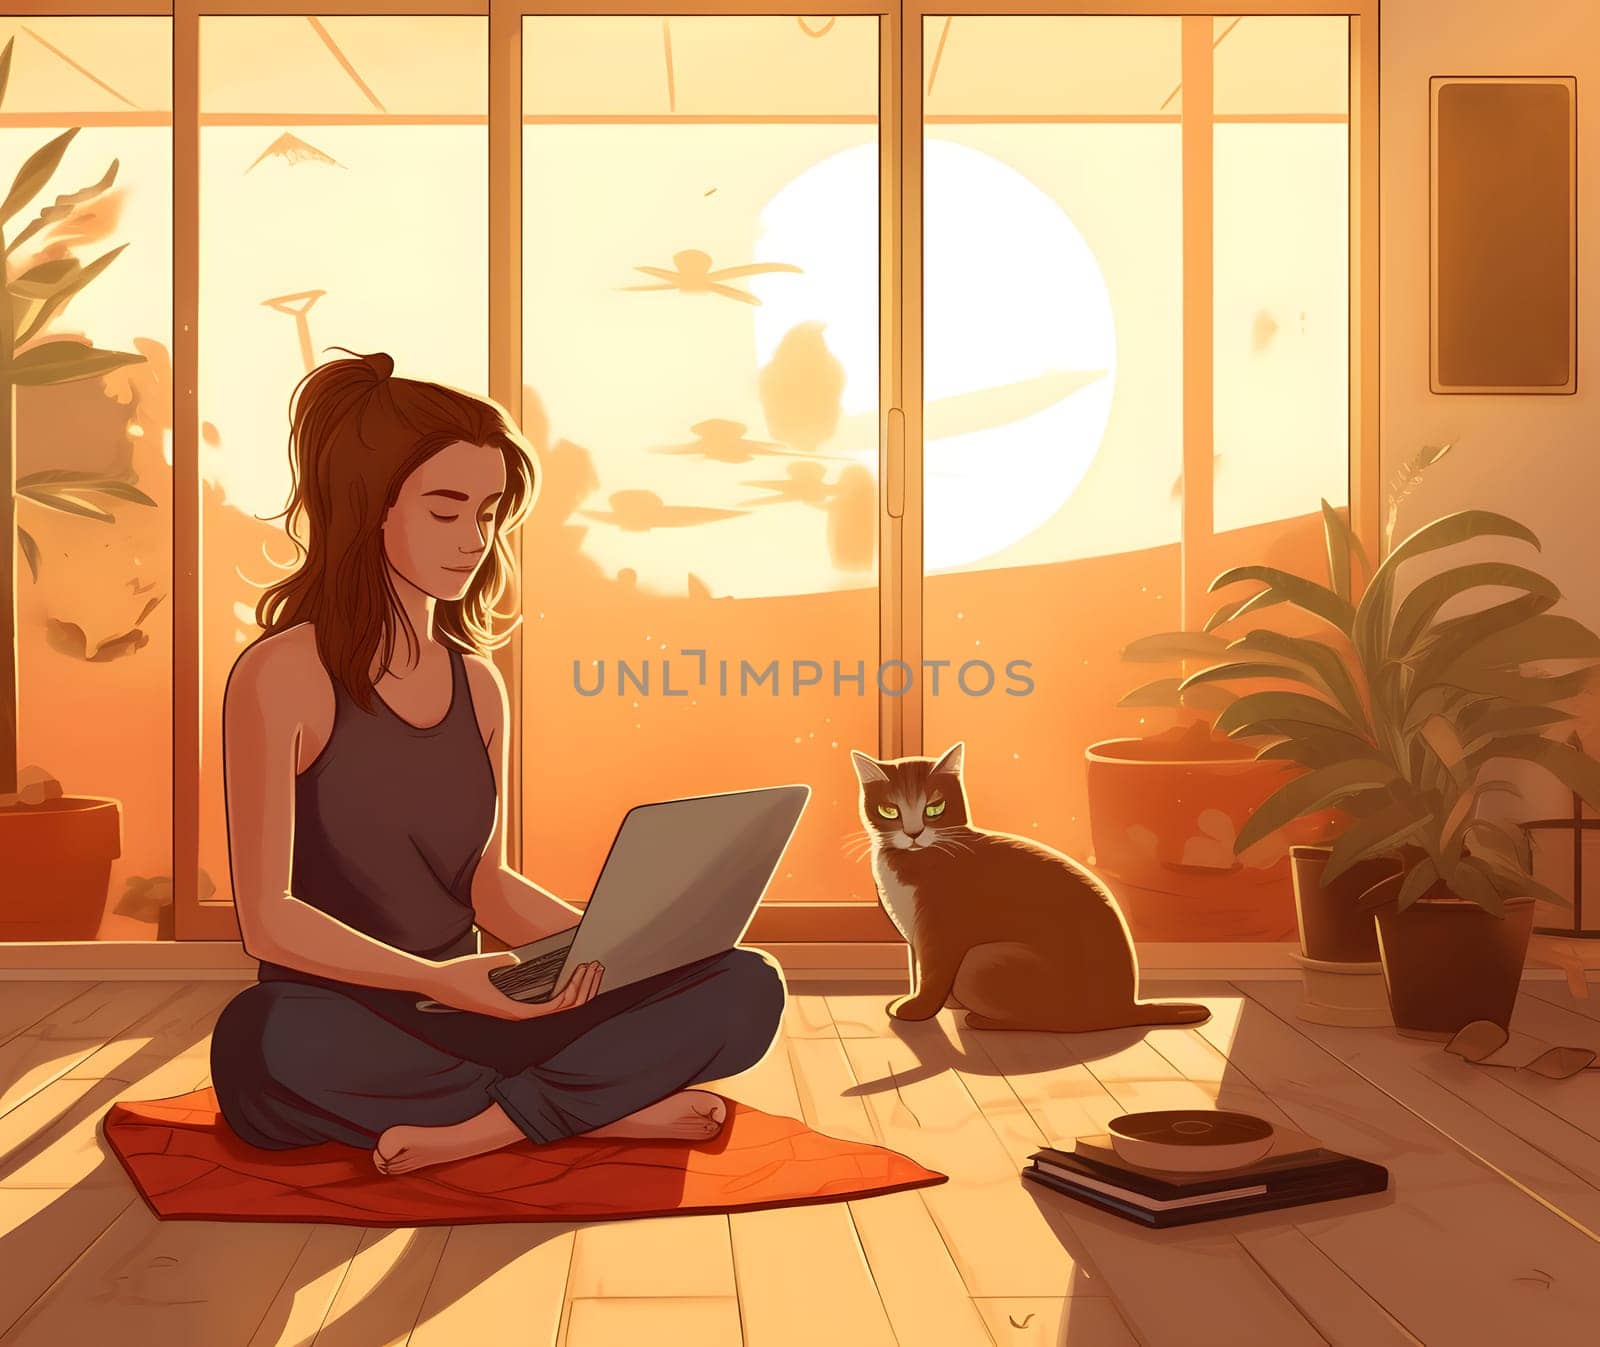 brunette woman with laptop sitting on the floor of domestic room at sunrise or sunset. Neural network generated in May 2023. Not based on any actual person, scene or pattern.